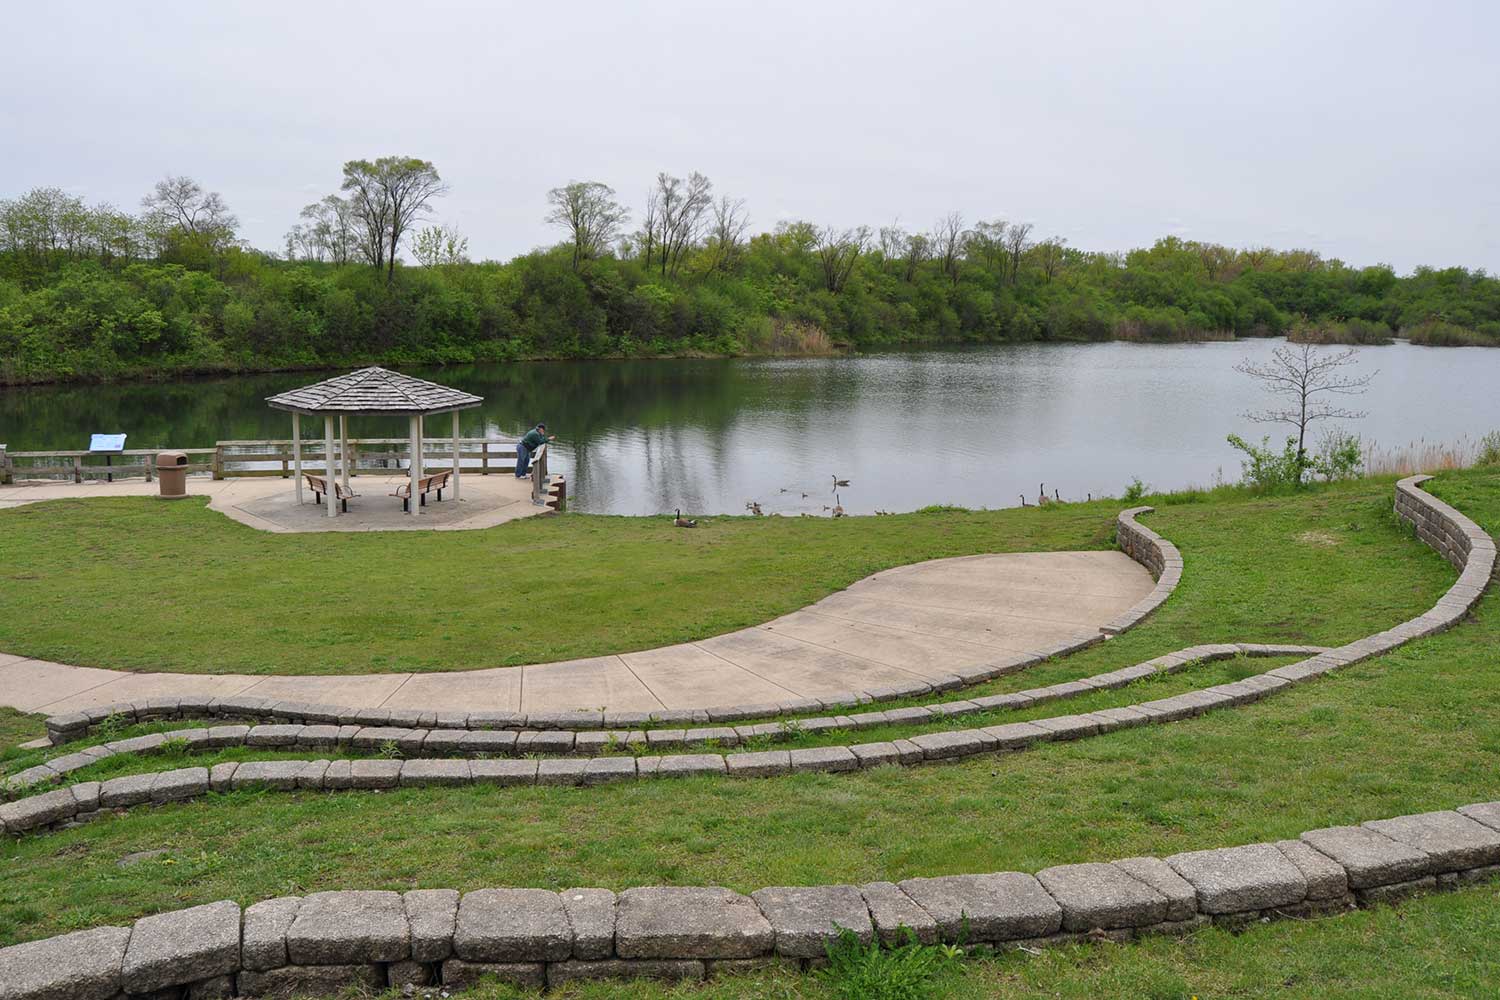 A view of the amphitheater at Turtle Lake.